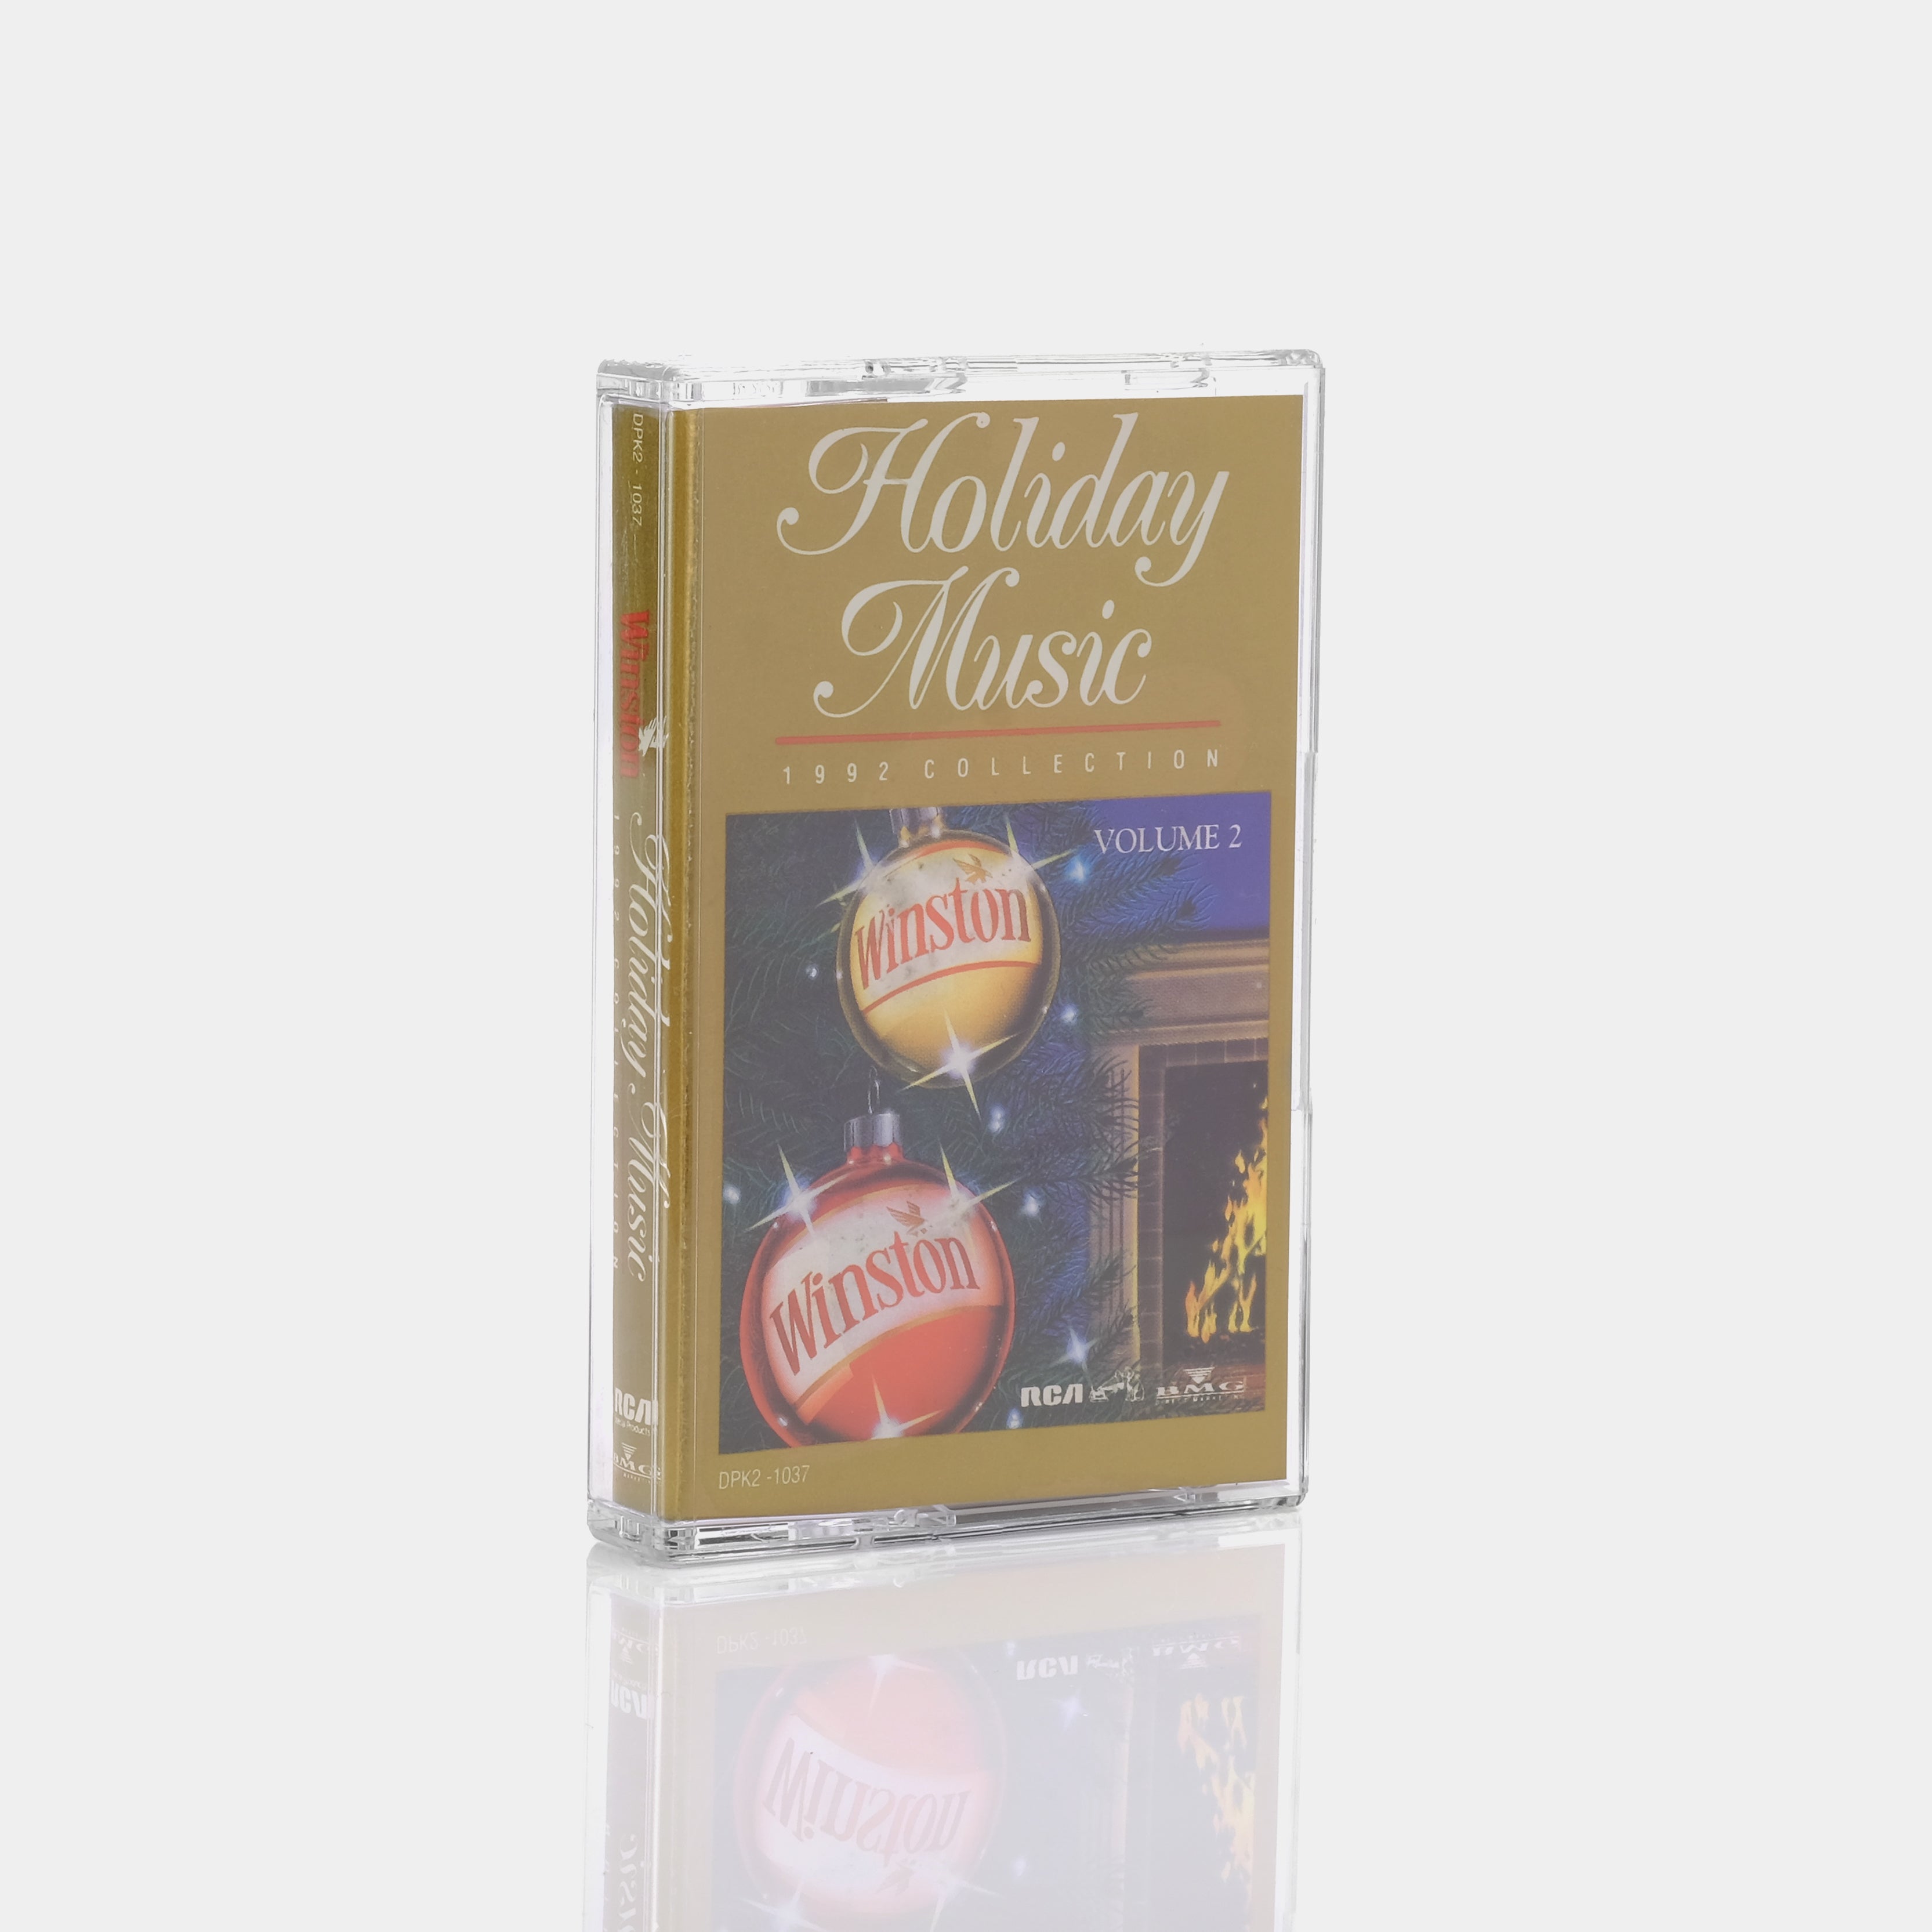 Winston Holiday Music - Volume 2 1992 Collection Cassette Tape